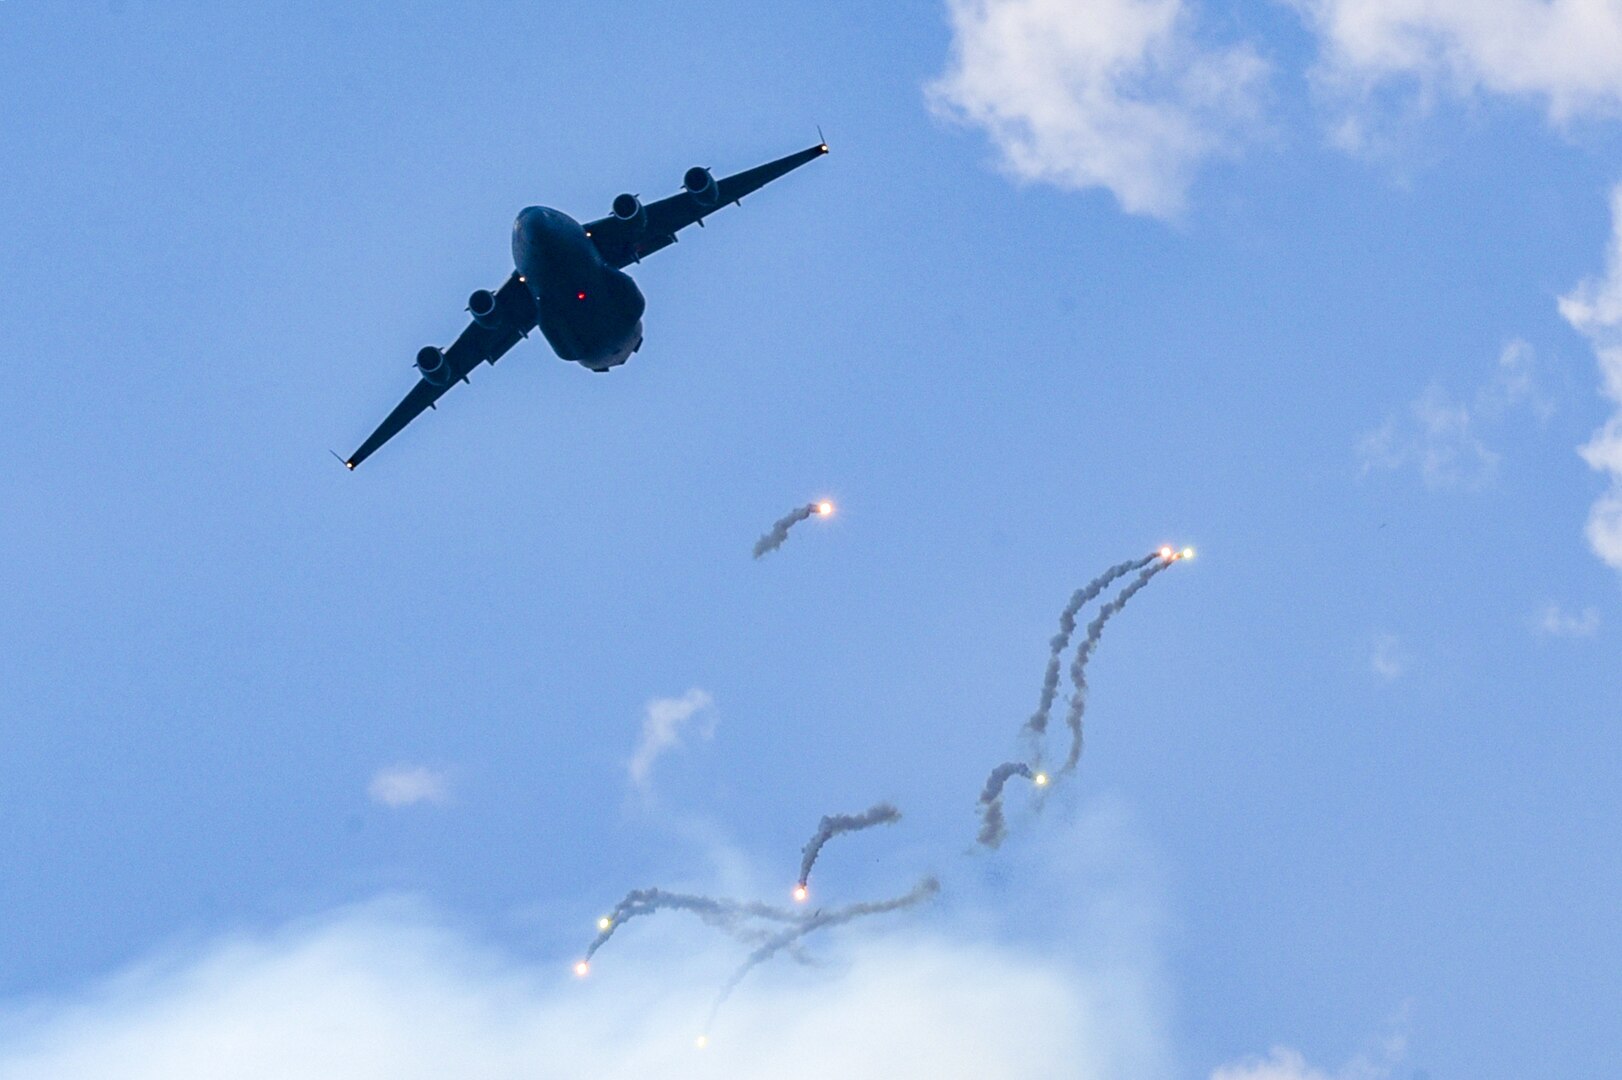 A C-17 Globemaster III aircraft from the 305th Air Mobility Wing and its associate reserve unit, the 514th Air Mobility Wing, based at Joint Base McGuire-Dix-Lakehurst, New Jersey,  practices flying a resupply mission into a hostile location while responding to simulated surface to air missiles at Bollen Range on Fort Indiantown Gap, Pennsylvania, Aug. 22, 2002. The crew of the C-17 included two 111th Attack Wing personnel who helped integrate MQ-9 support.